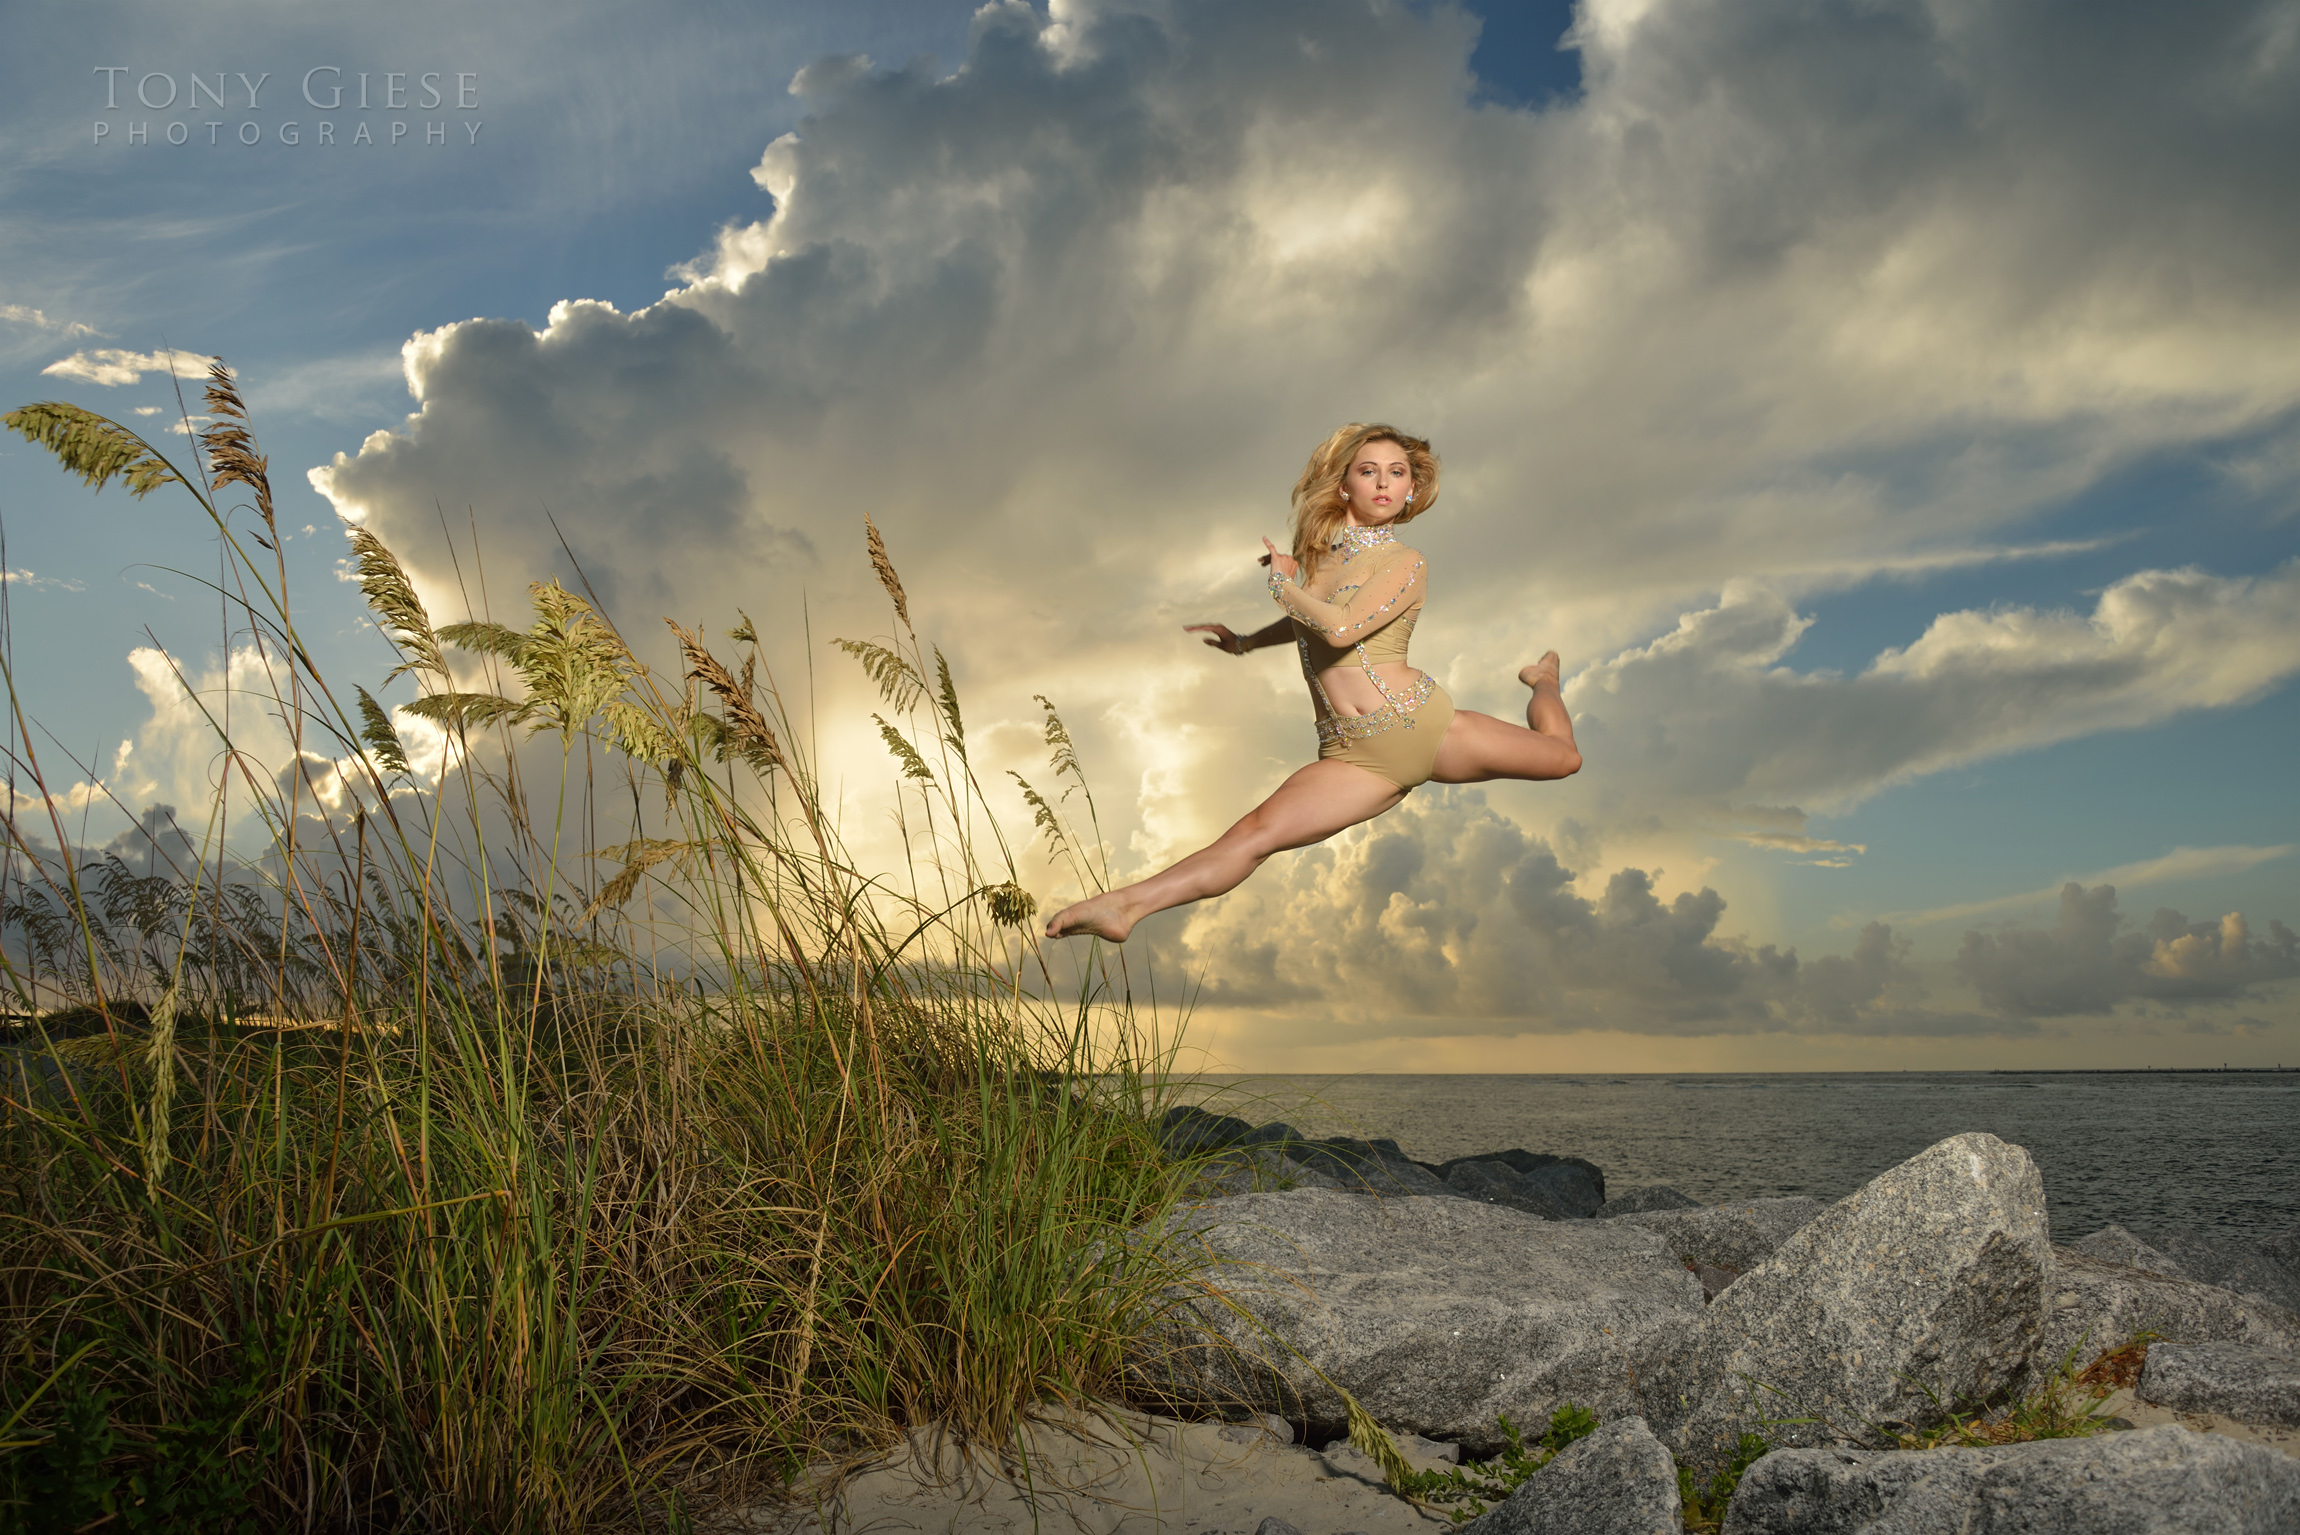 Tallee dancing move of jumping rocks on ocean, Ponce Inlet, Florida. Photography by Tony Giese